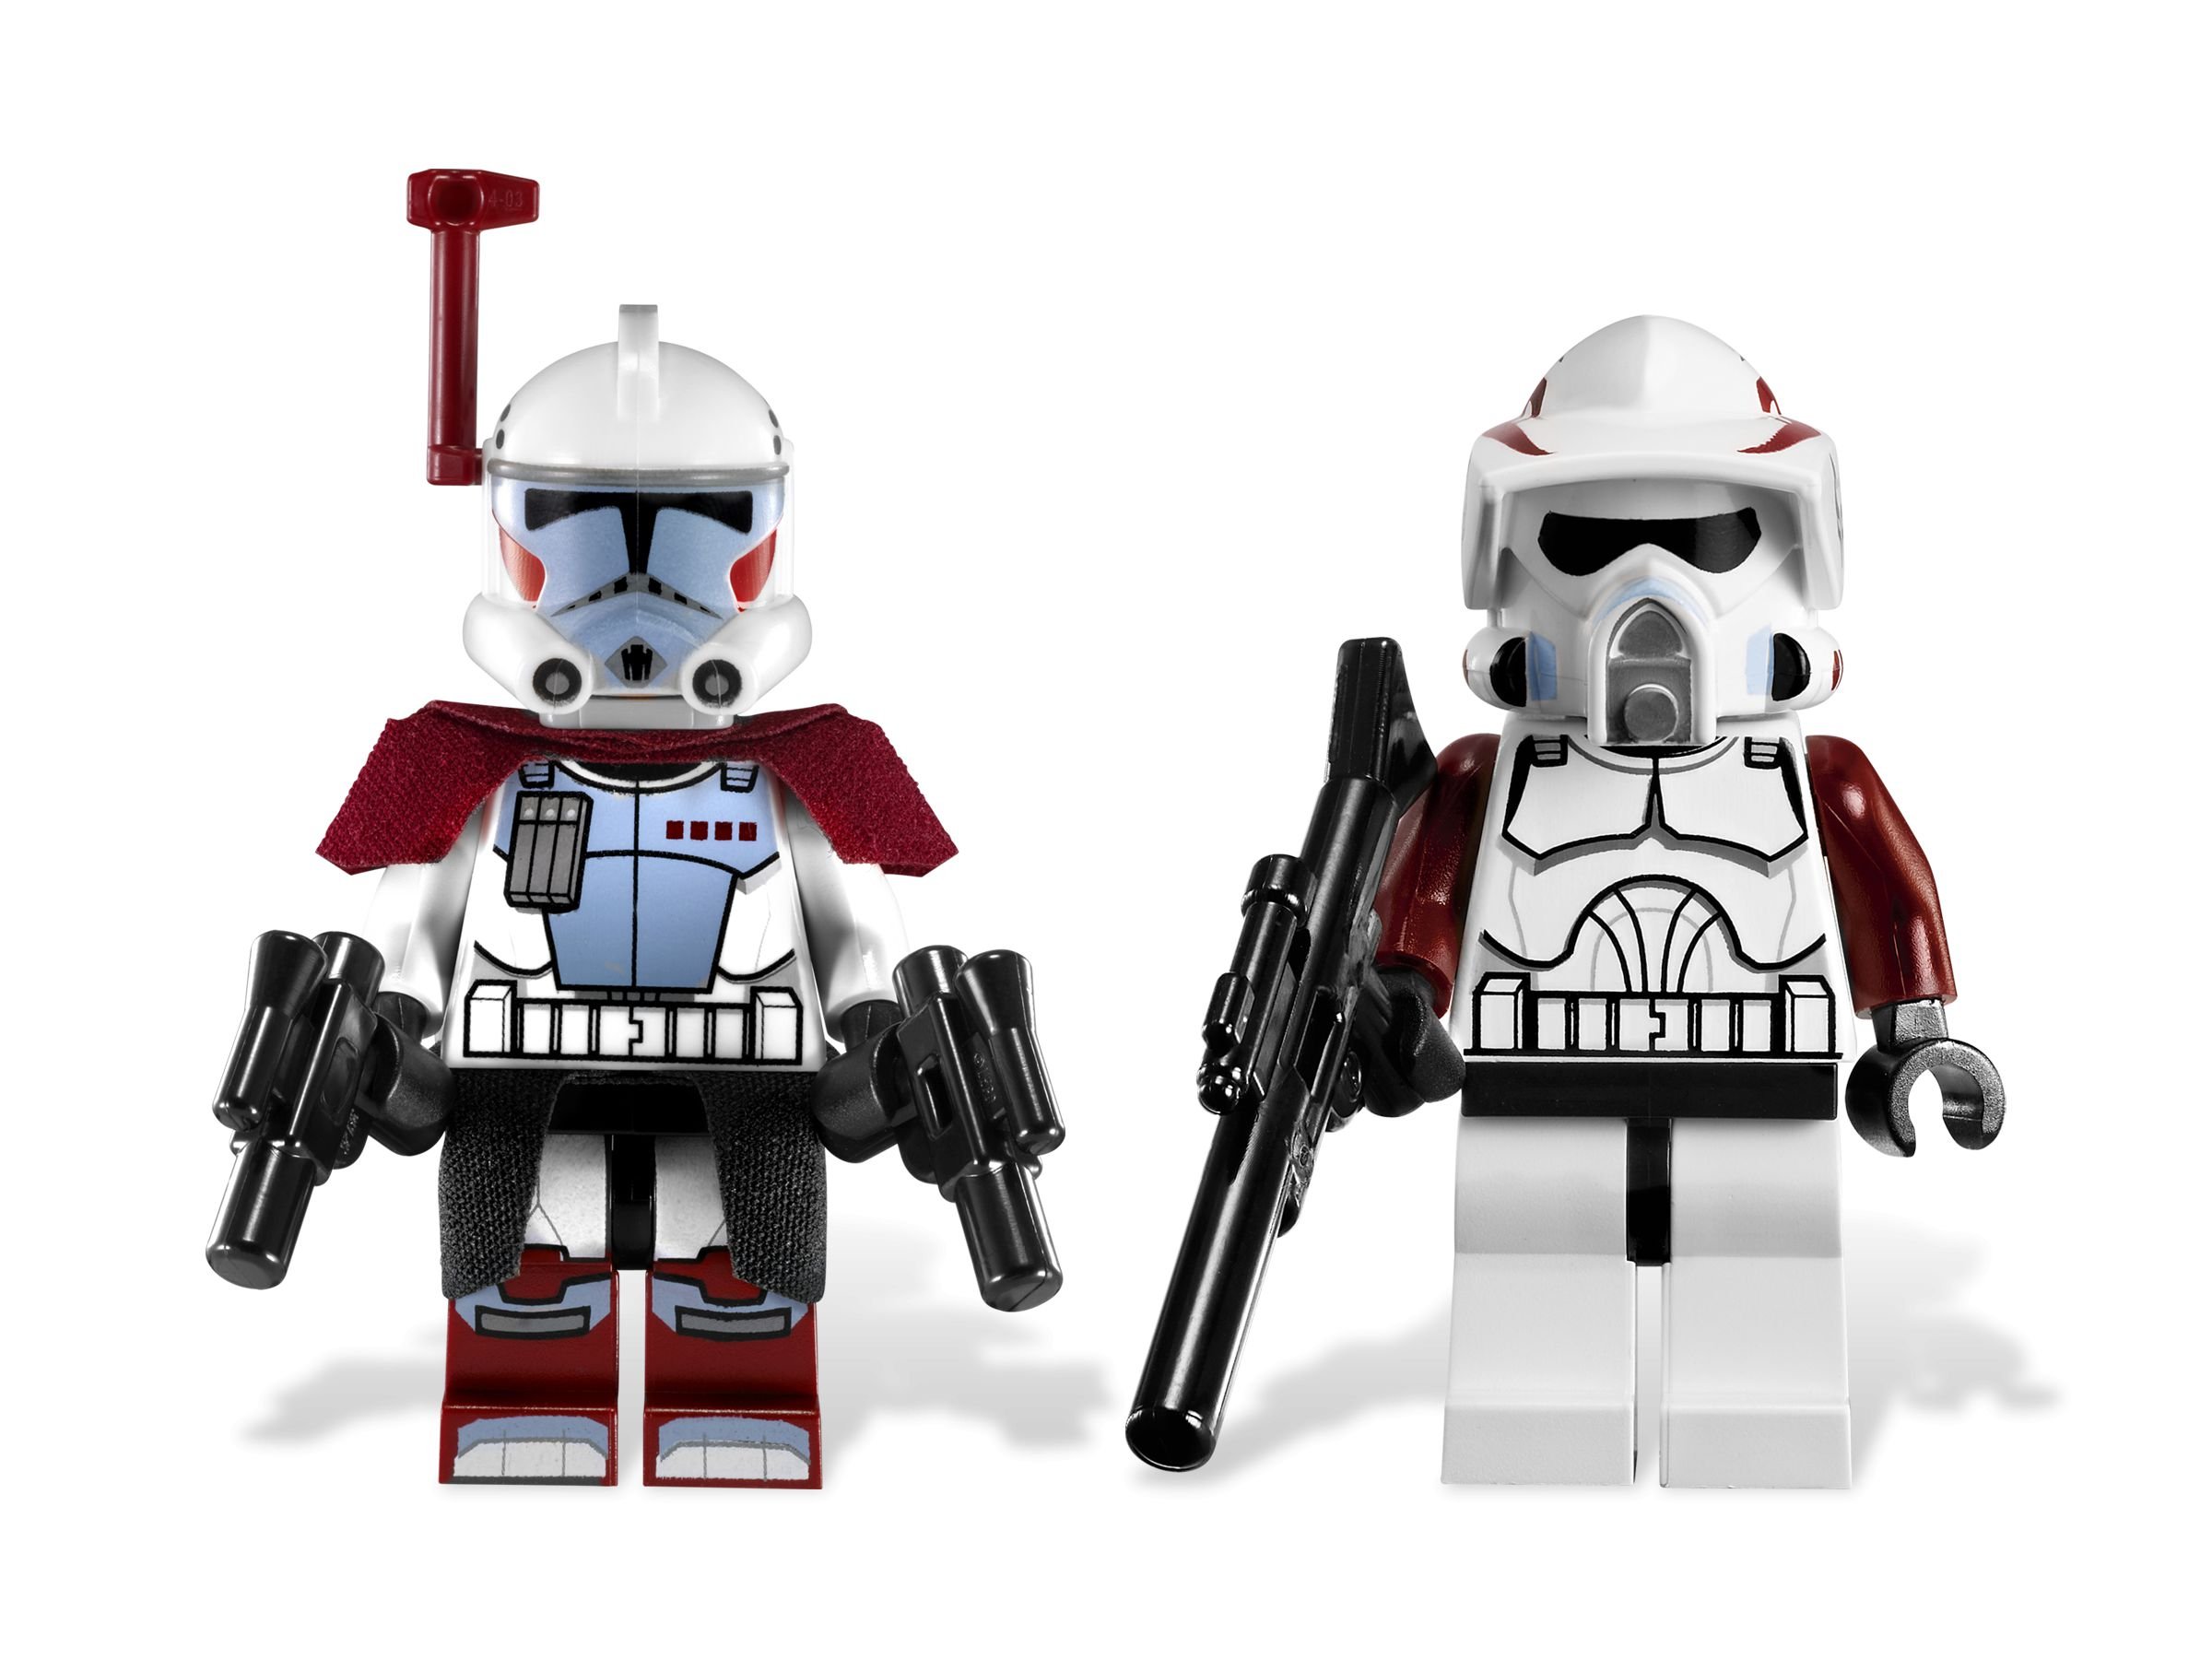 red lego star wars clone fighter